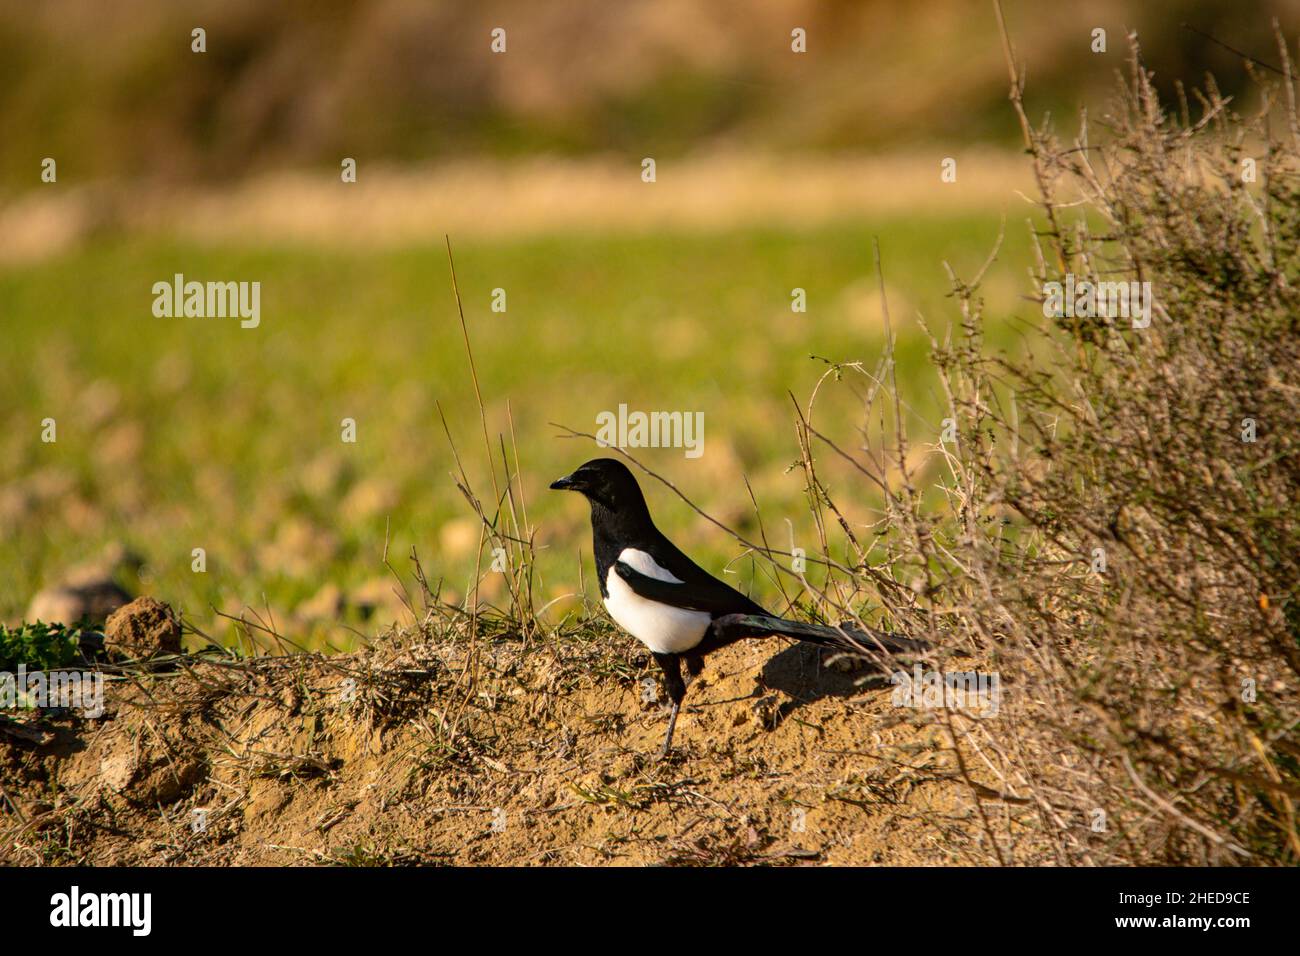 The common magpie is a species of passerine bird in the Corvidae family. Stock Photo